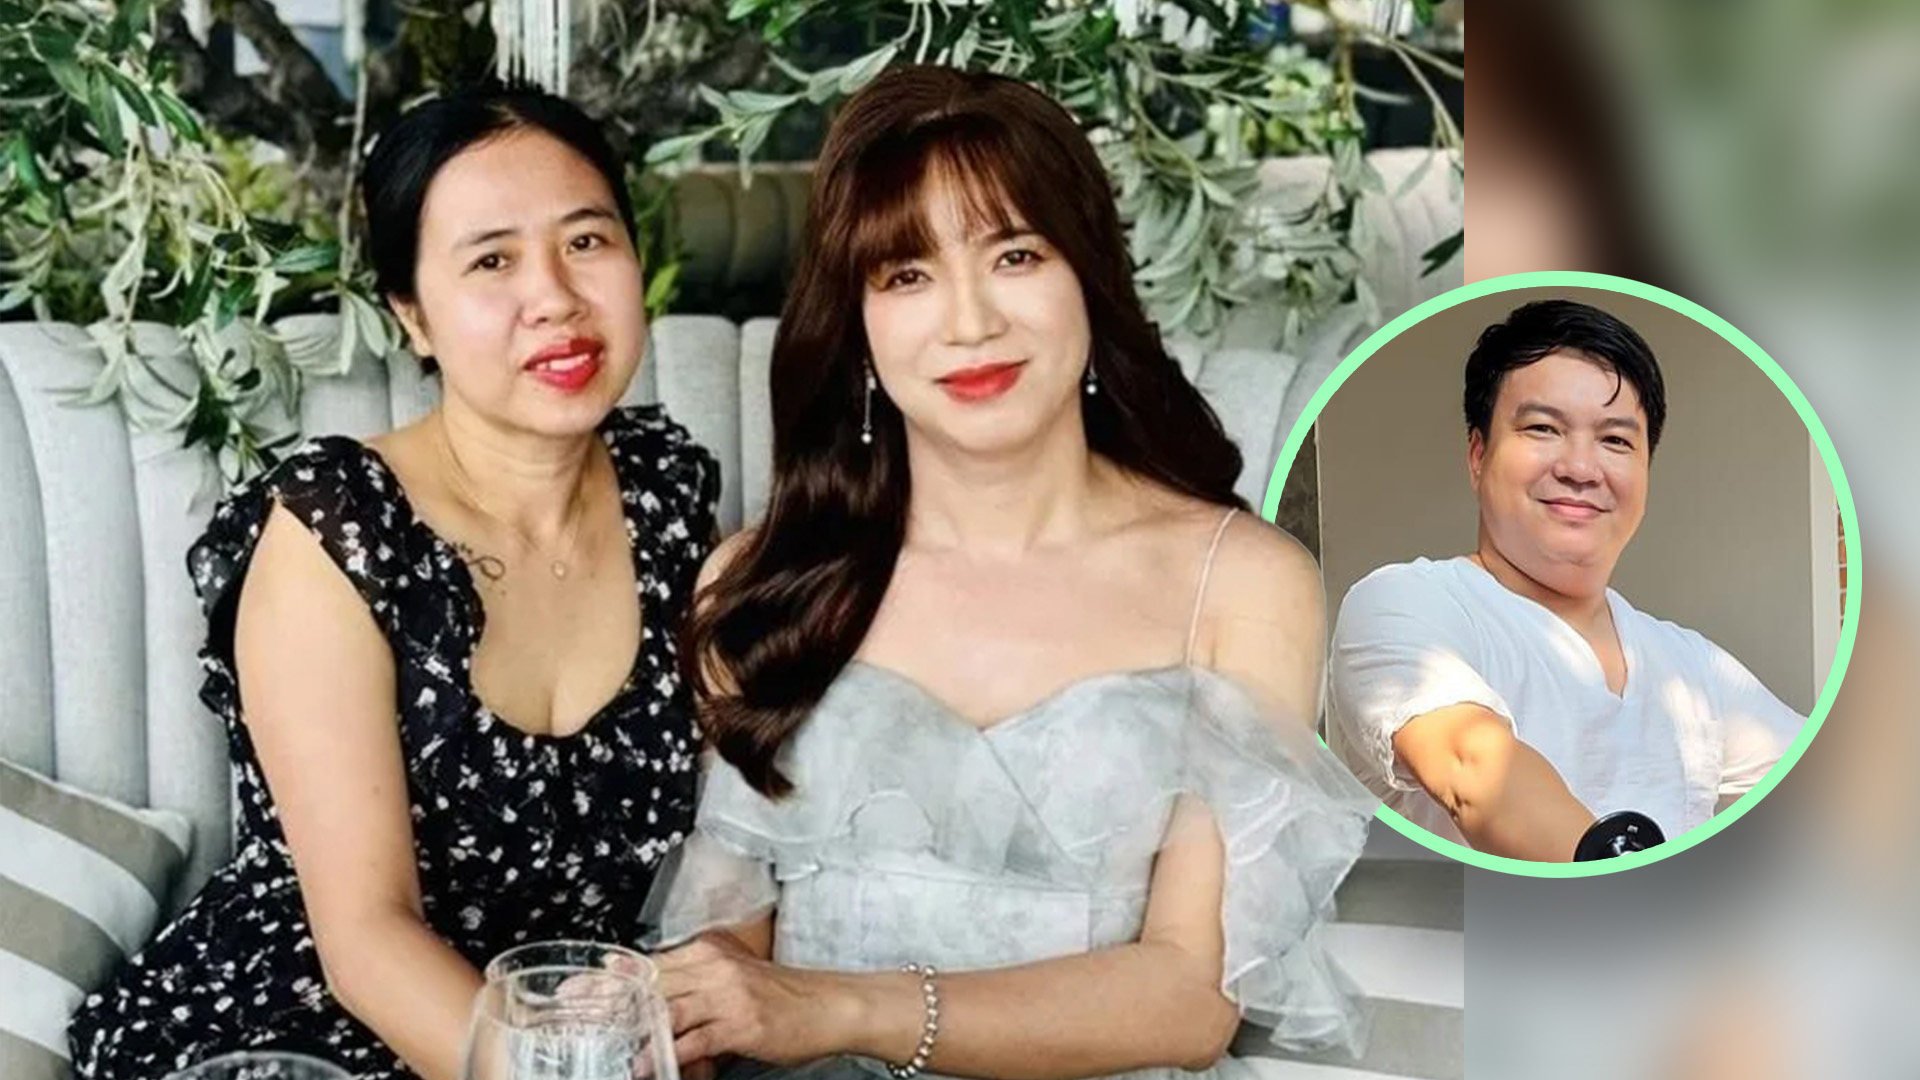 The decision of an eight-years married with children Vietnamese man who has decided to transition into a woman has been fully backed by his wife and family. Photo: SCMP composite/QQ/X